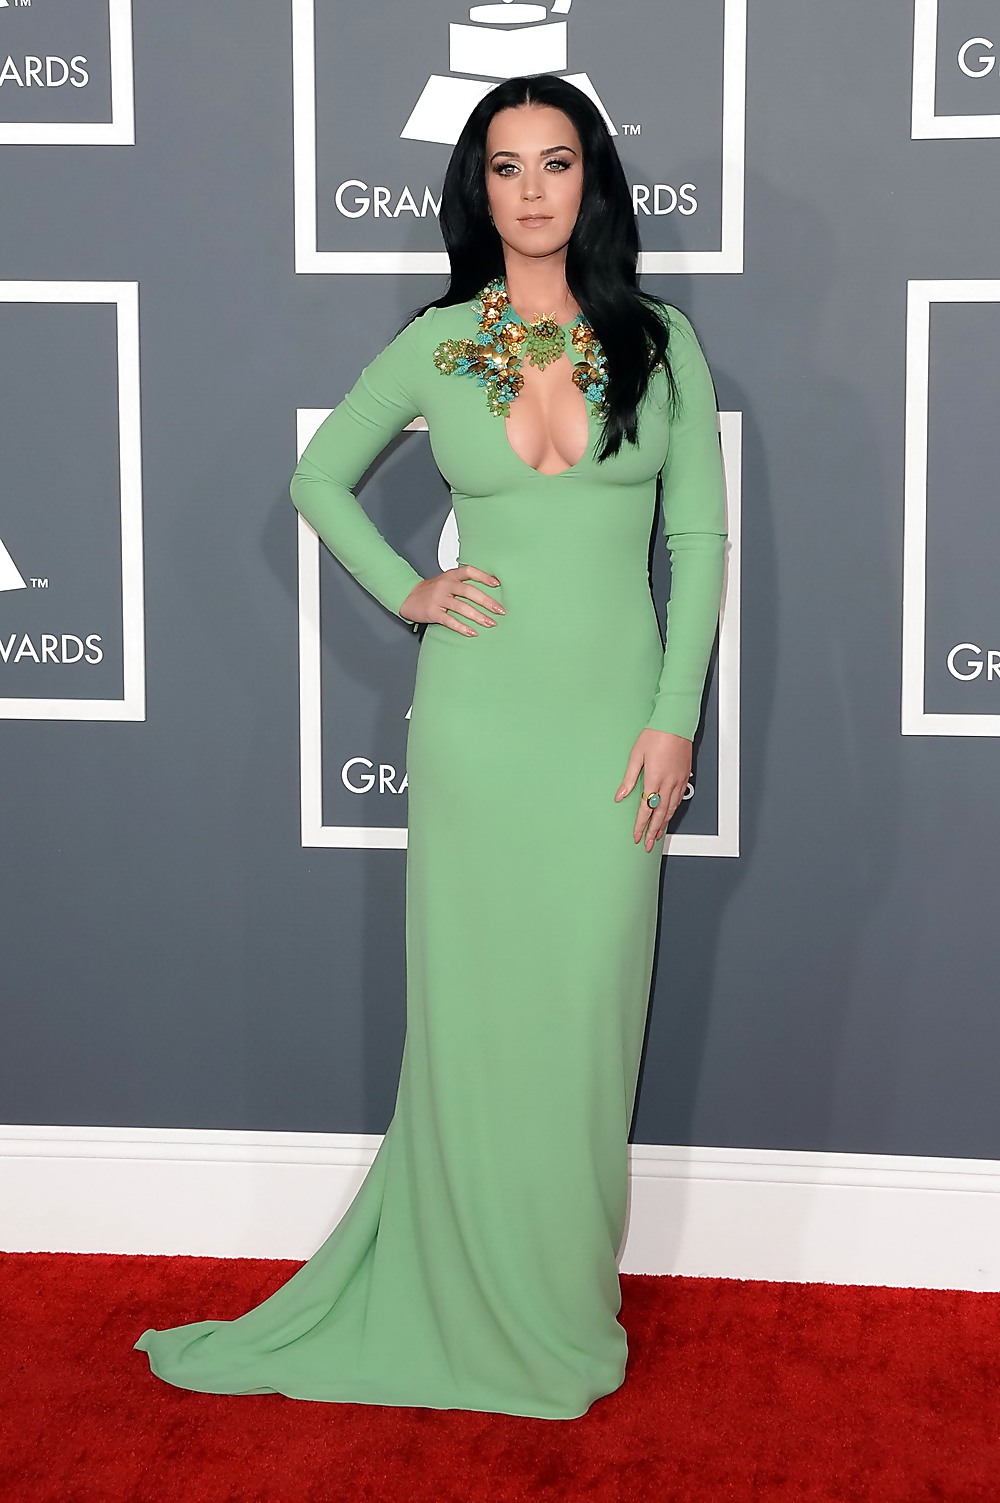 Katy Perry at grammy's red carpet #16967108